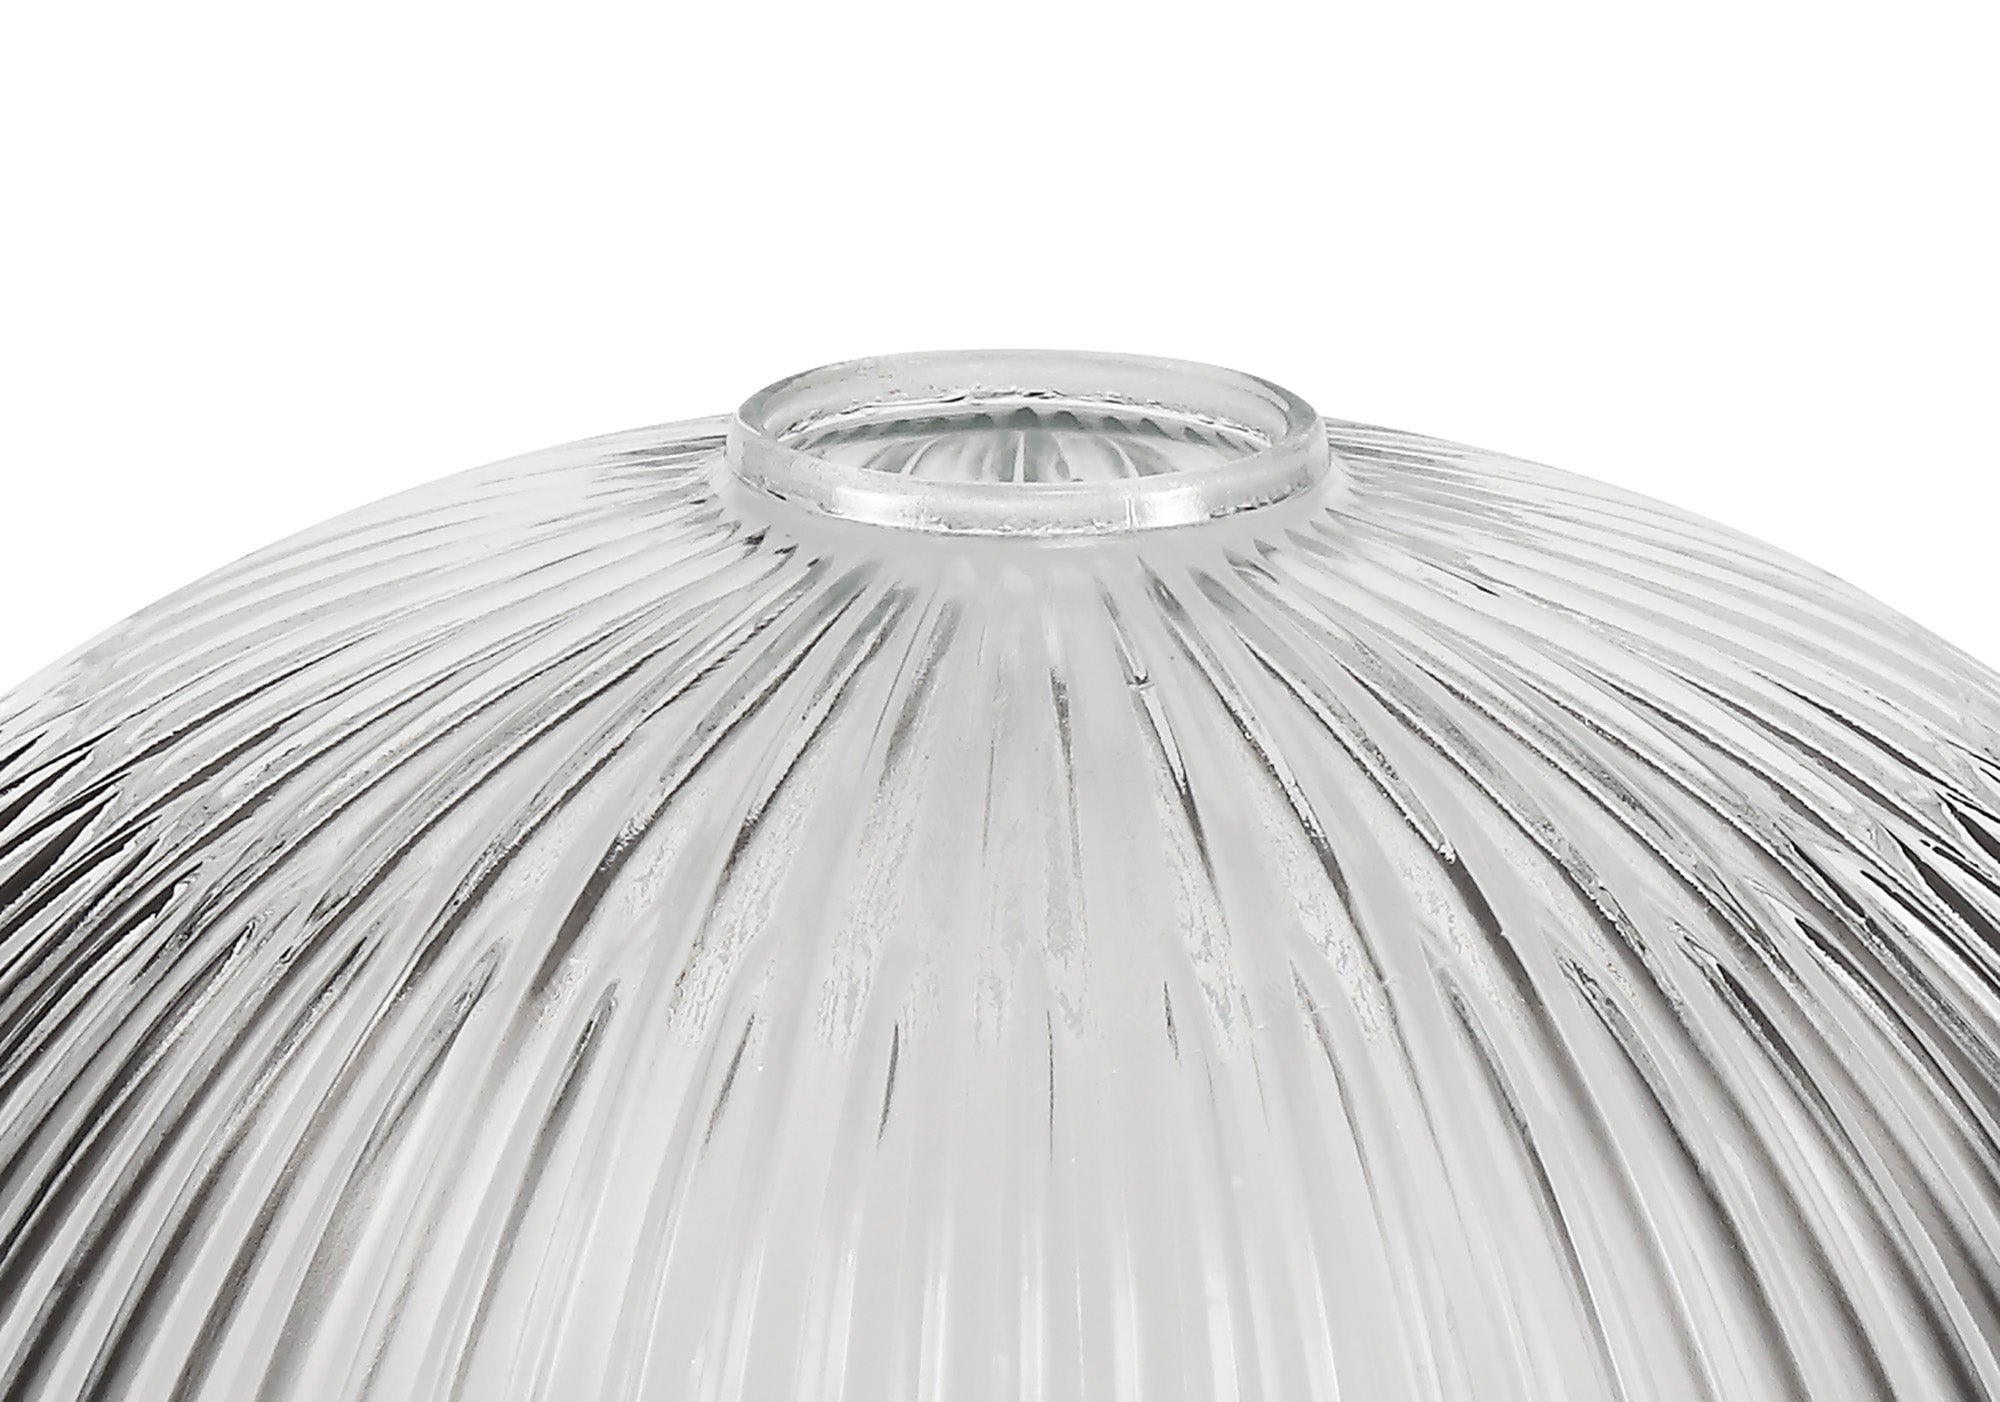 Docker Dome 30cm Clear Glass Lampshade LO180543